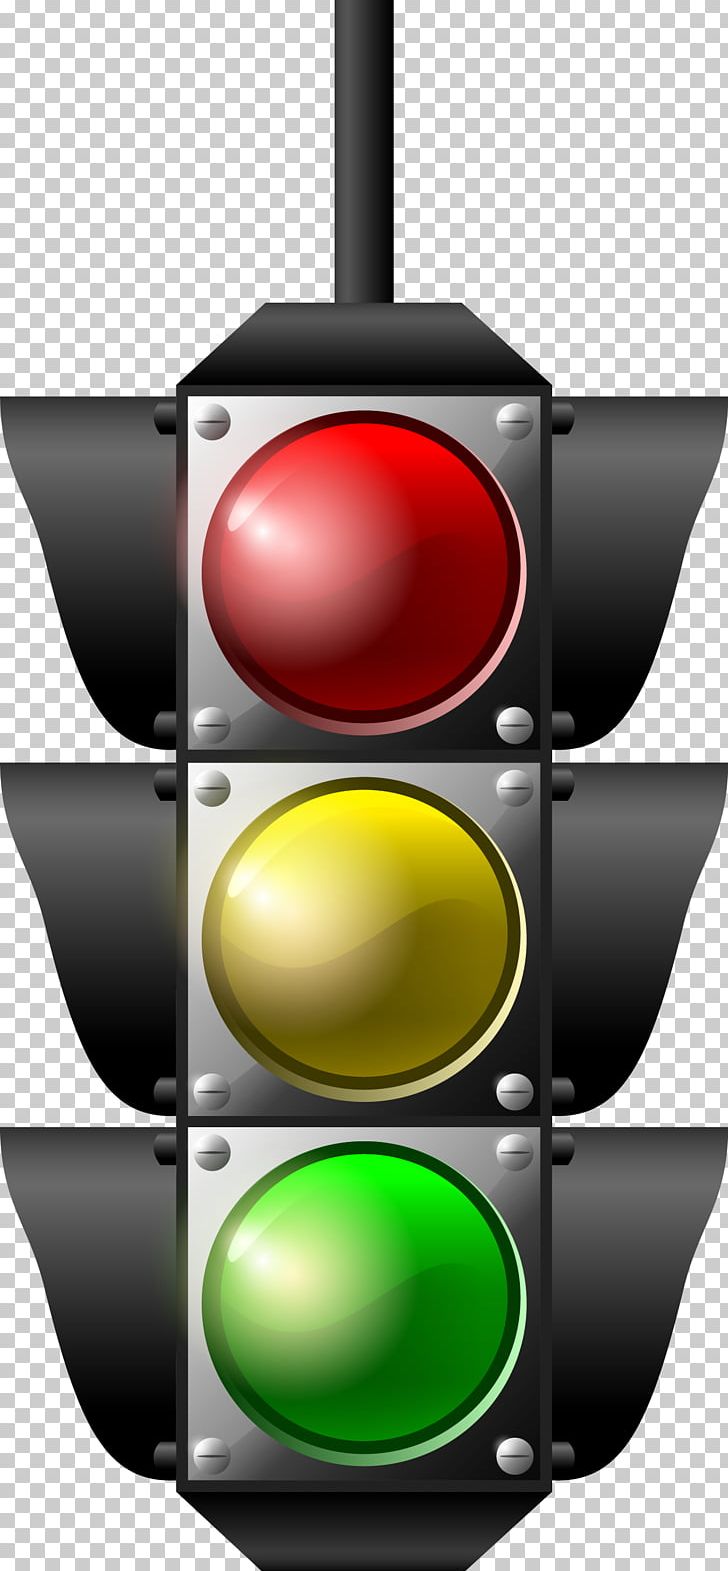 Traffic Light Road Transport Computer File PNG, Clipart, Black, Cars, Christmas Lights, Font, Hand Signals Free PNG Download